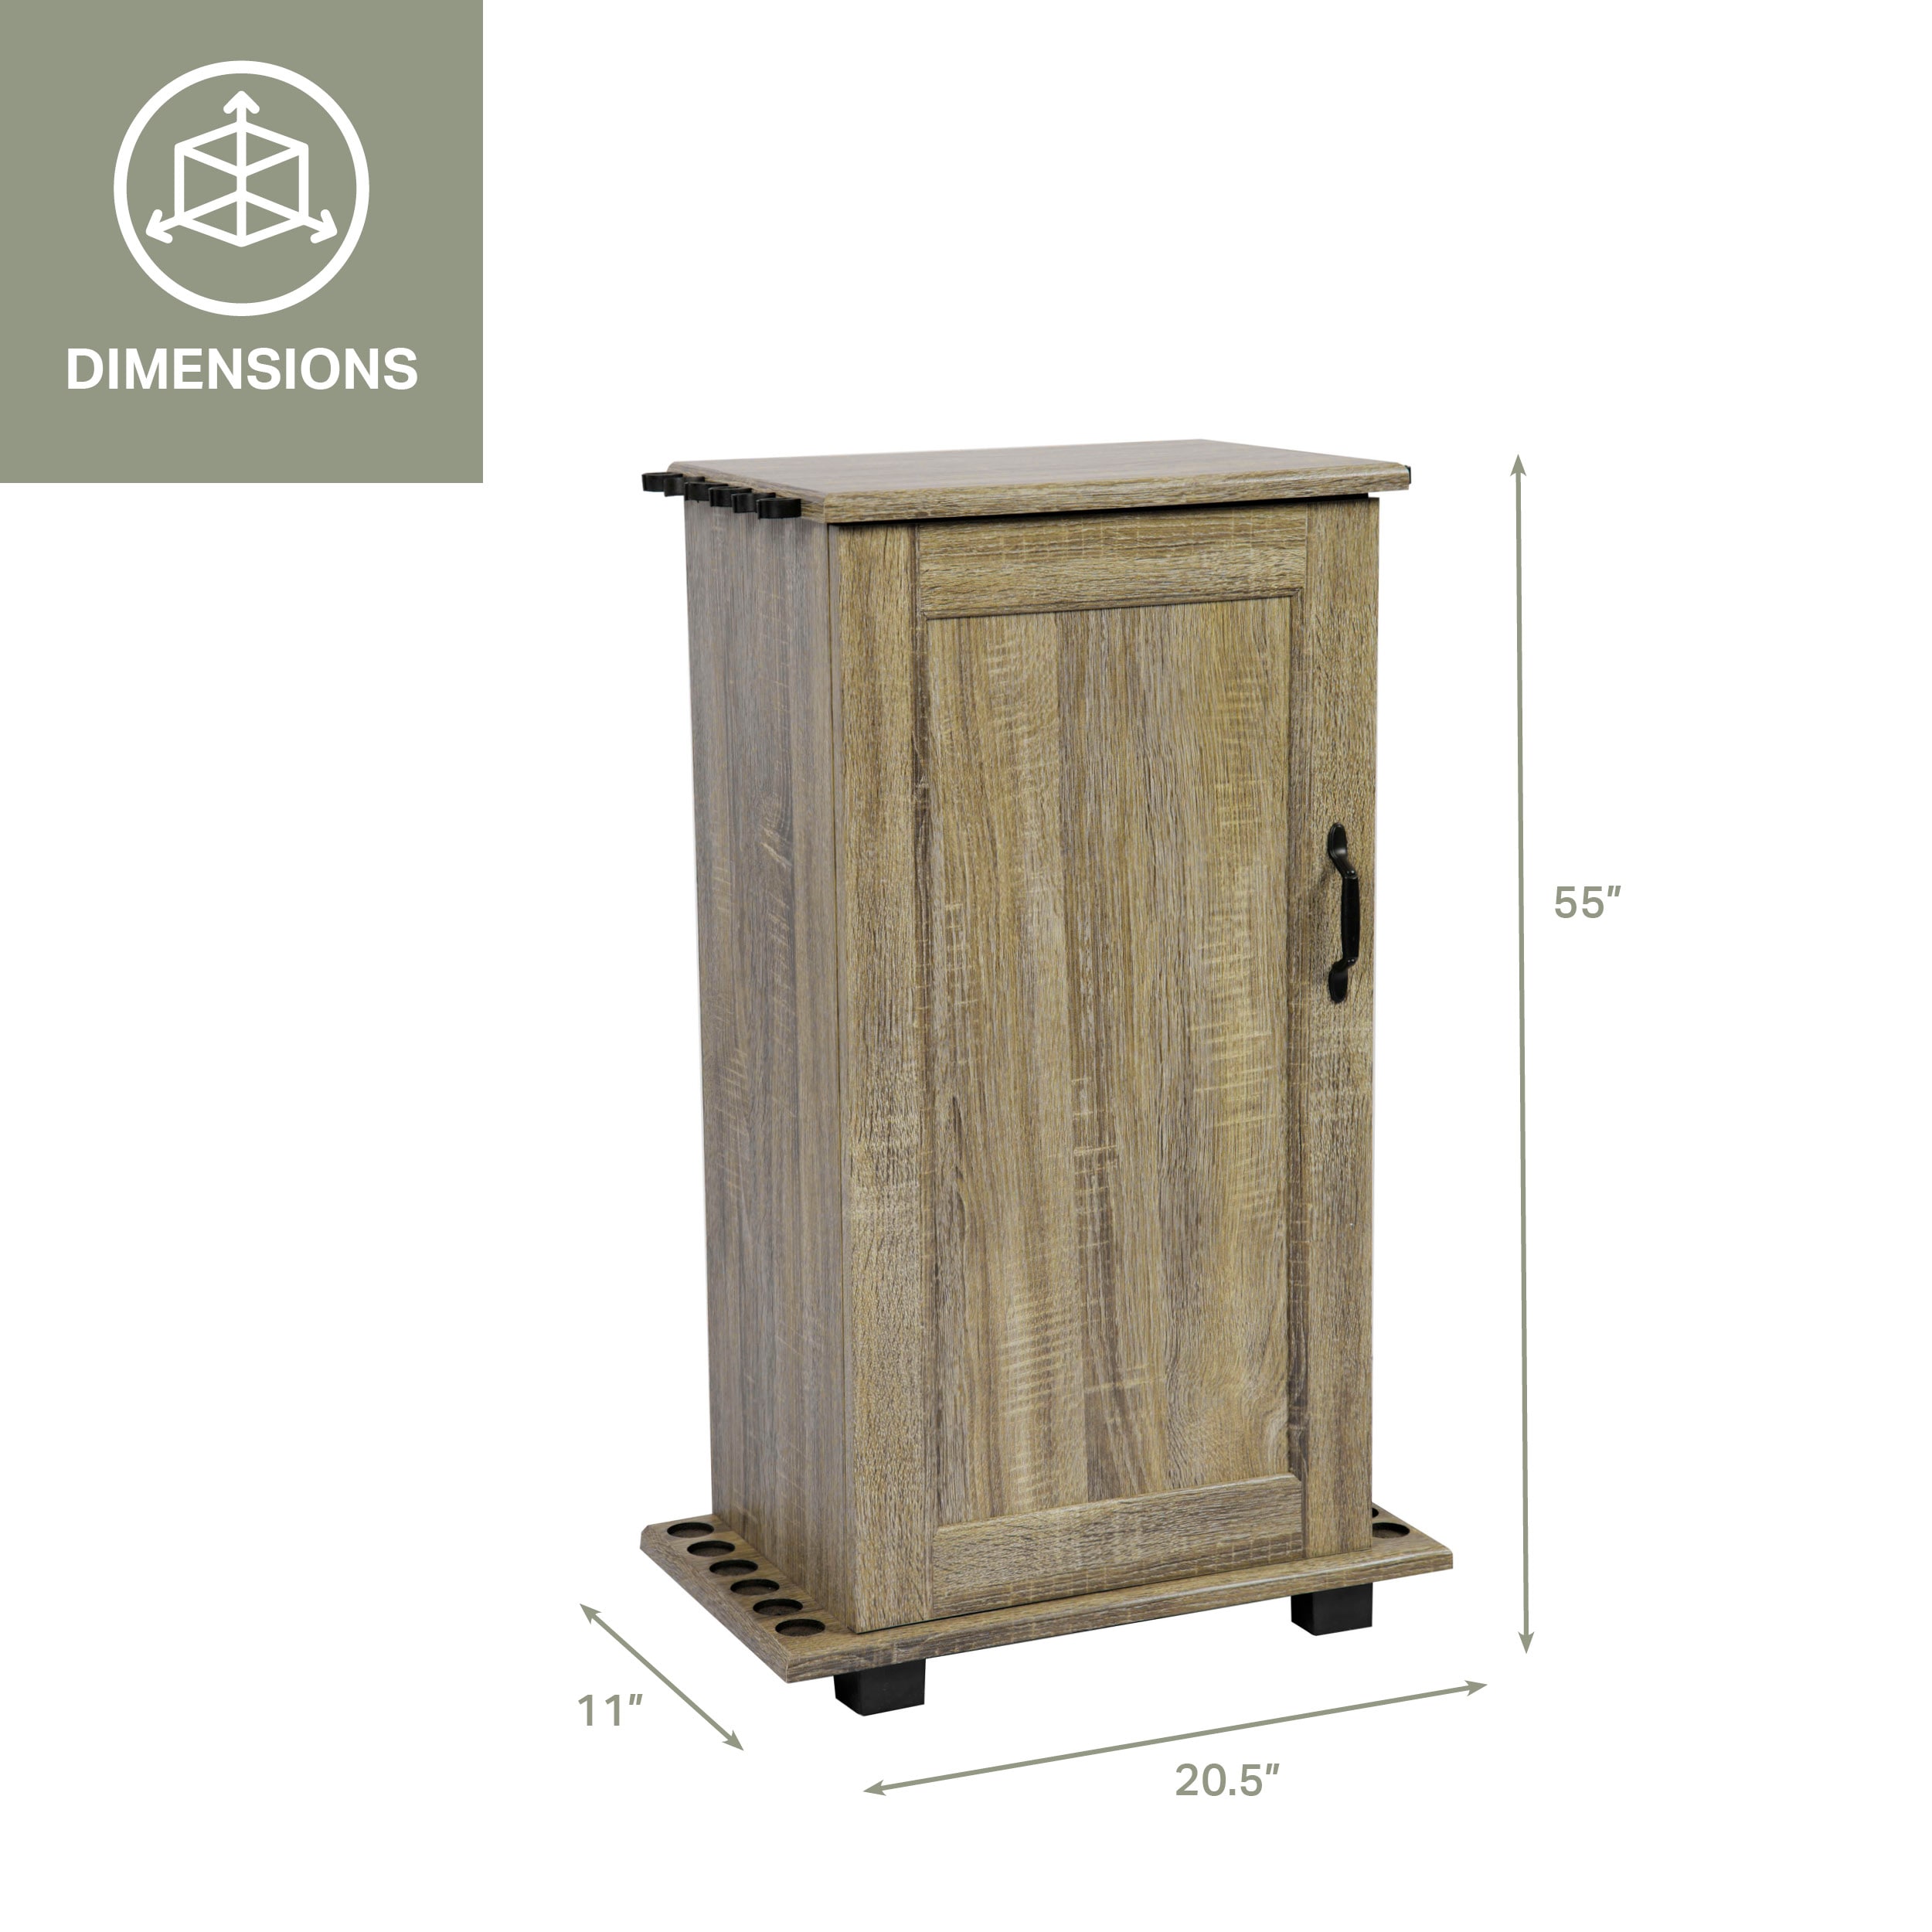 OSHOME Fishing Storage Collection Wood Fishing Storage Cabinet in